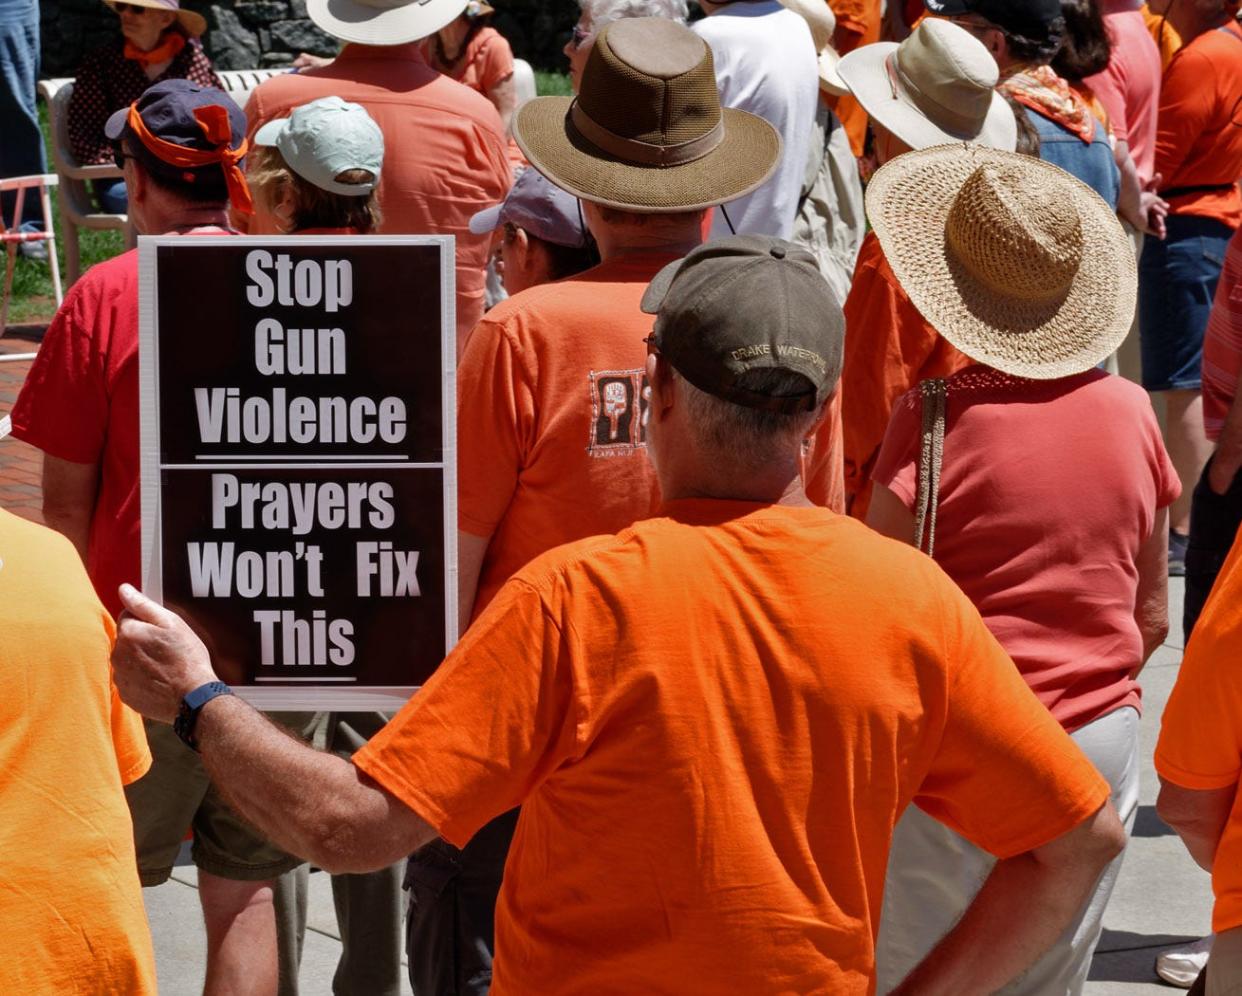 More than 100 gun violence awareness supporters came together in front of the Historic Courthouse in Hendersonville on Saturday, June 4. On today's Opinion page, readers share their issue on this topic that has been the subject of debate across the country.